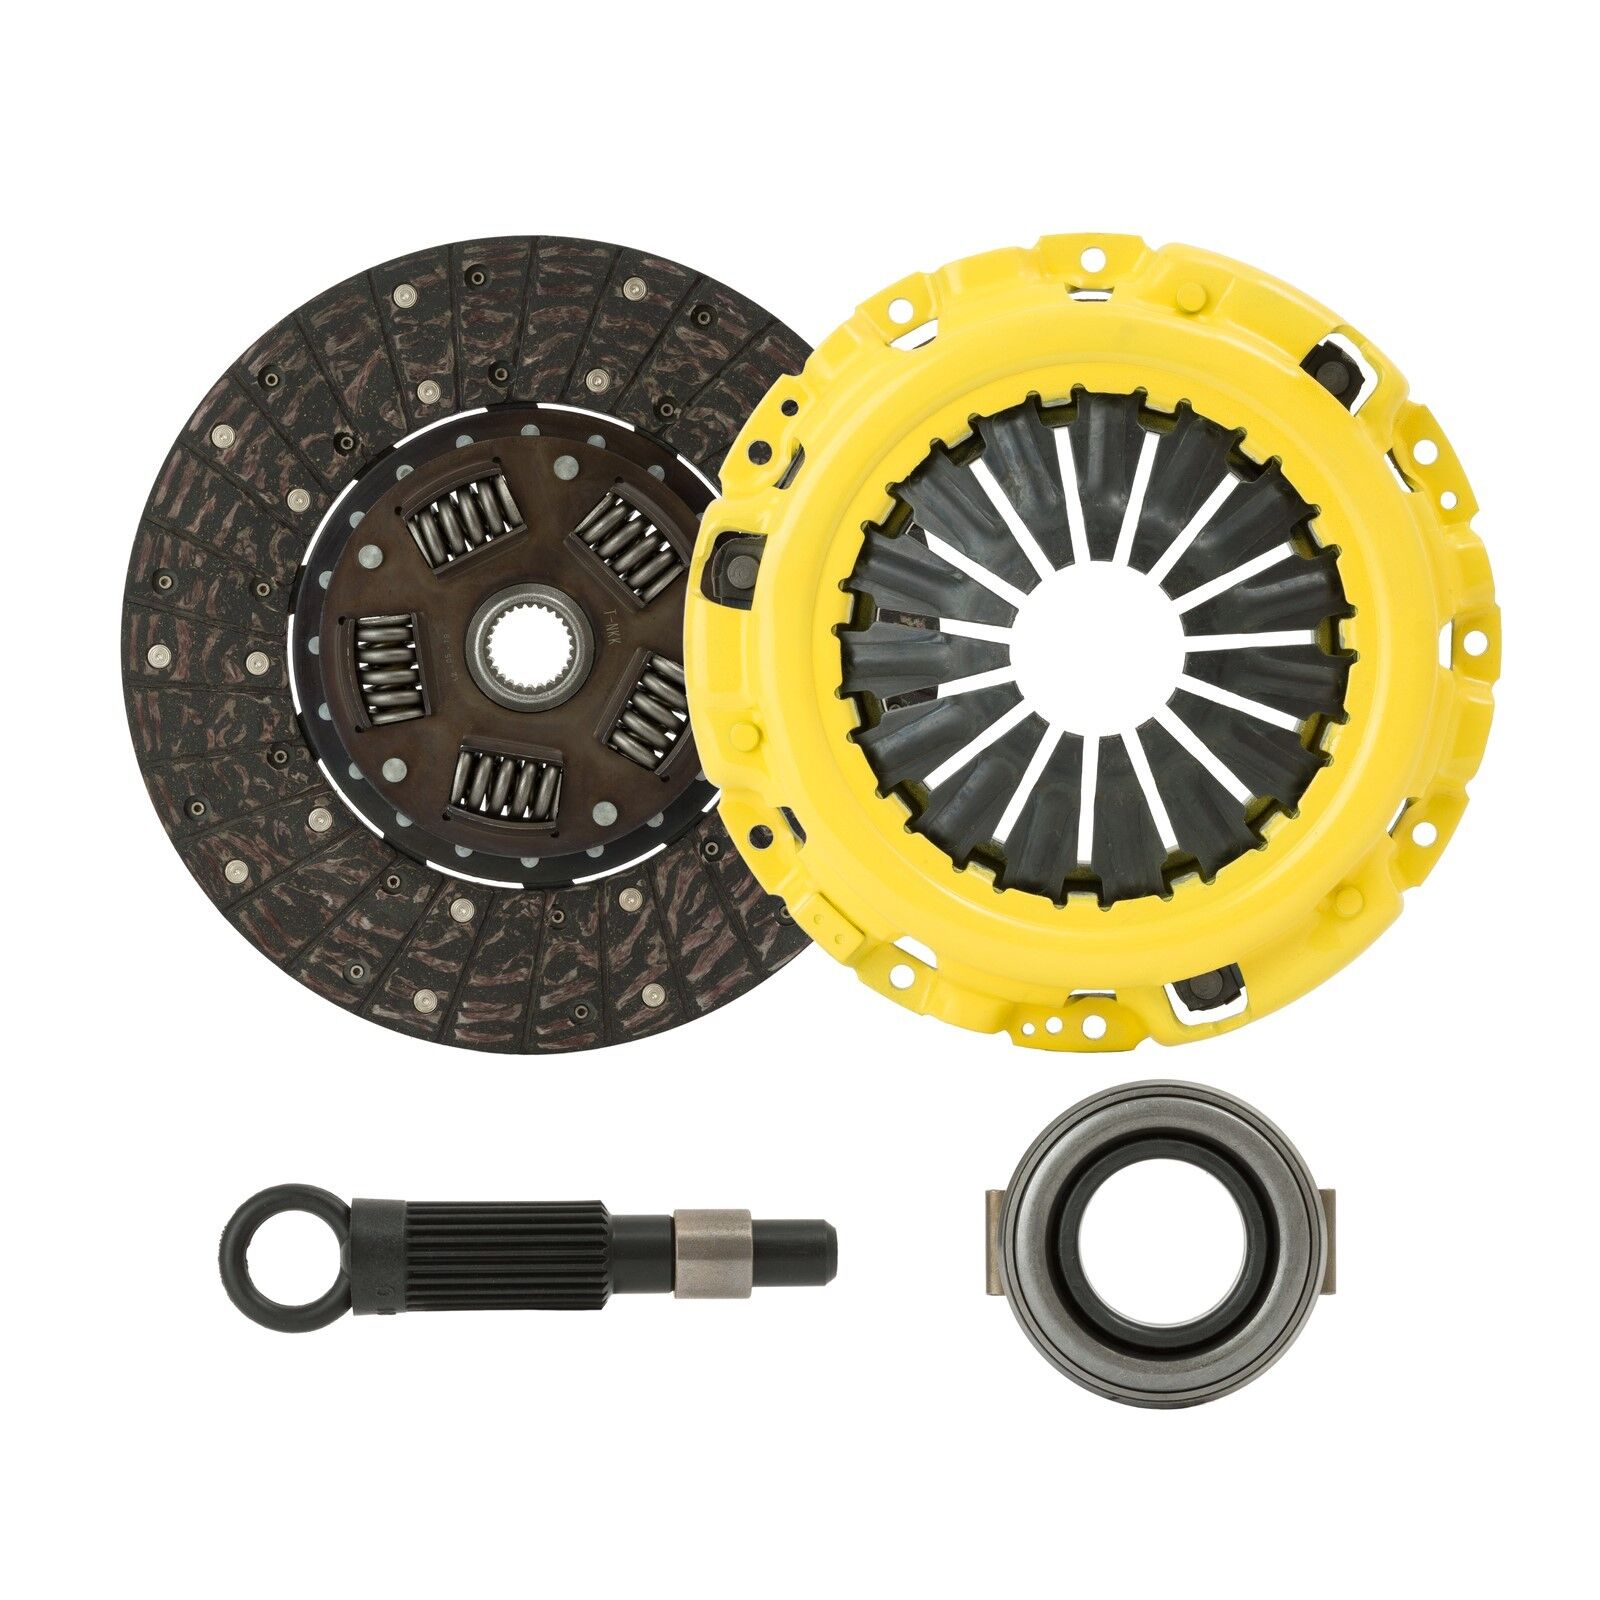 STAGE 1 RACING CLUTCH KIT fits ECLIPSE TALON LASER 4G63 TURBO by CLUTCHXPERTS